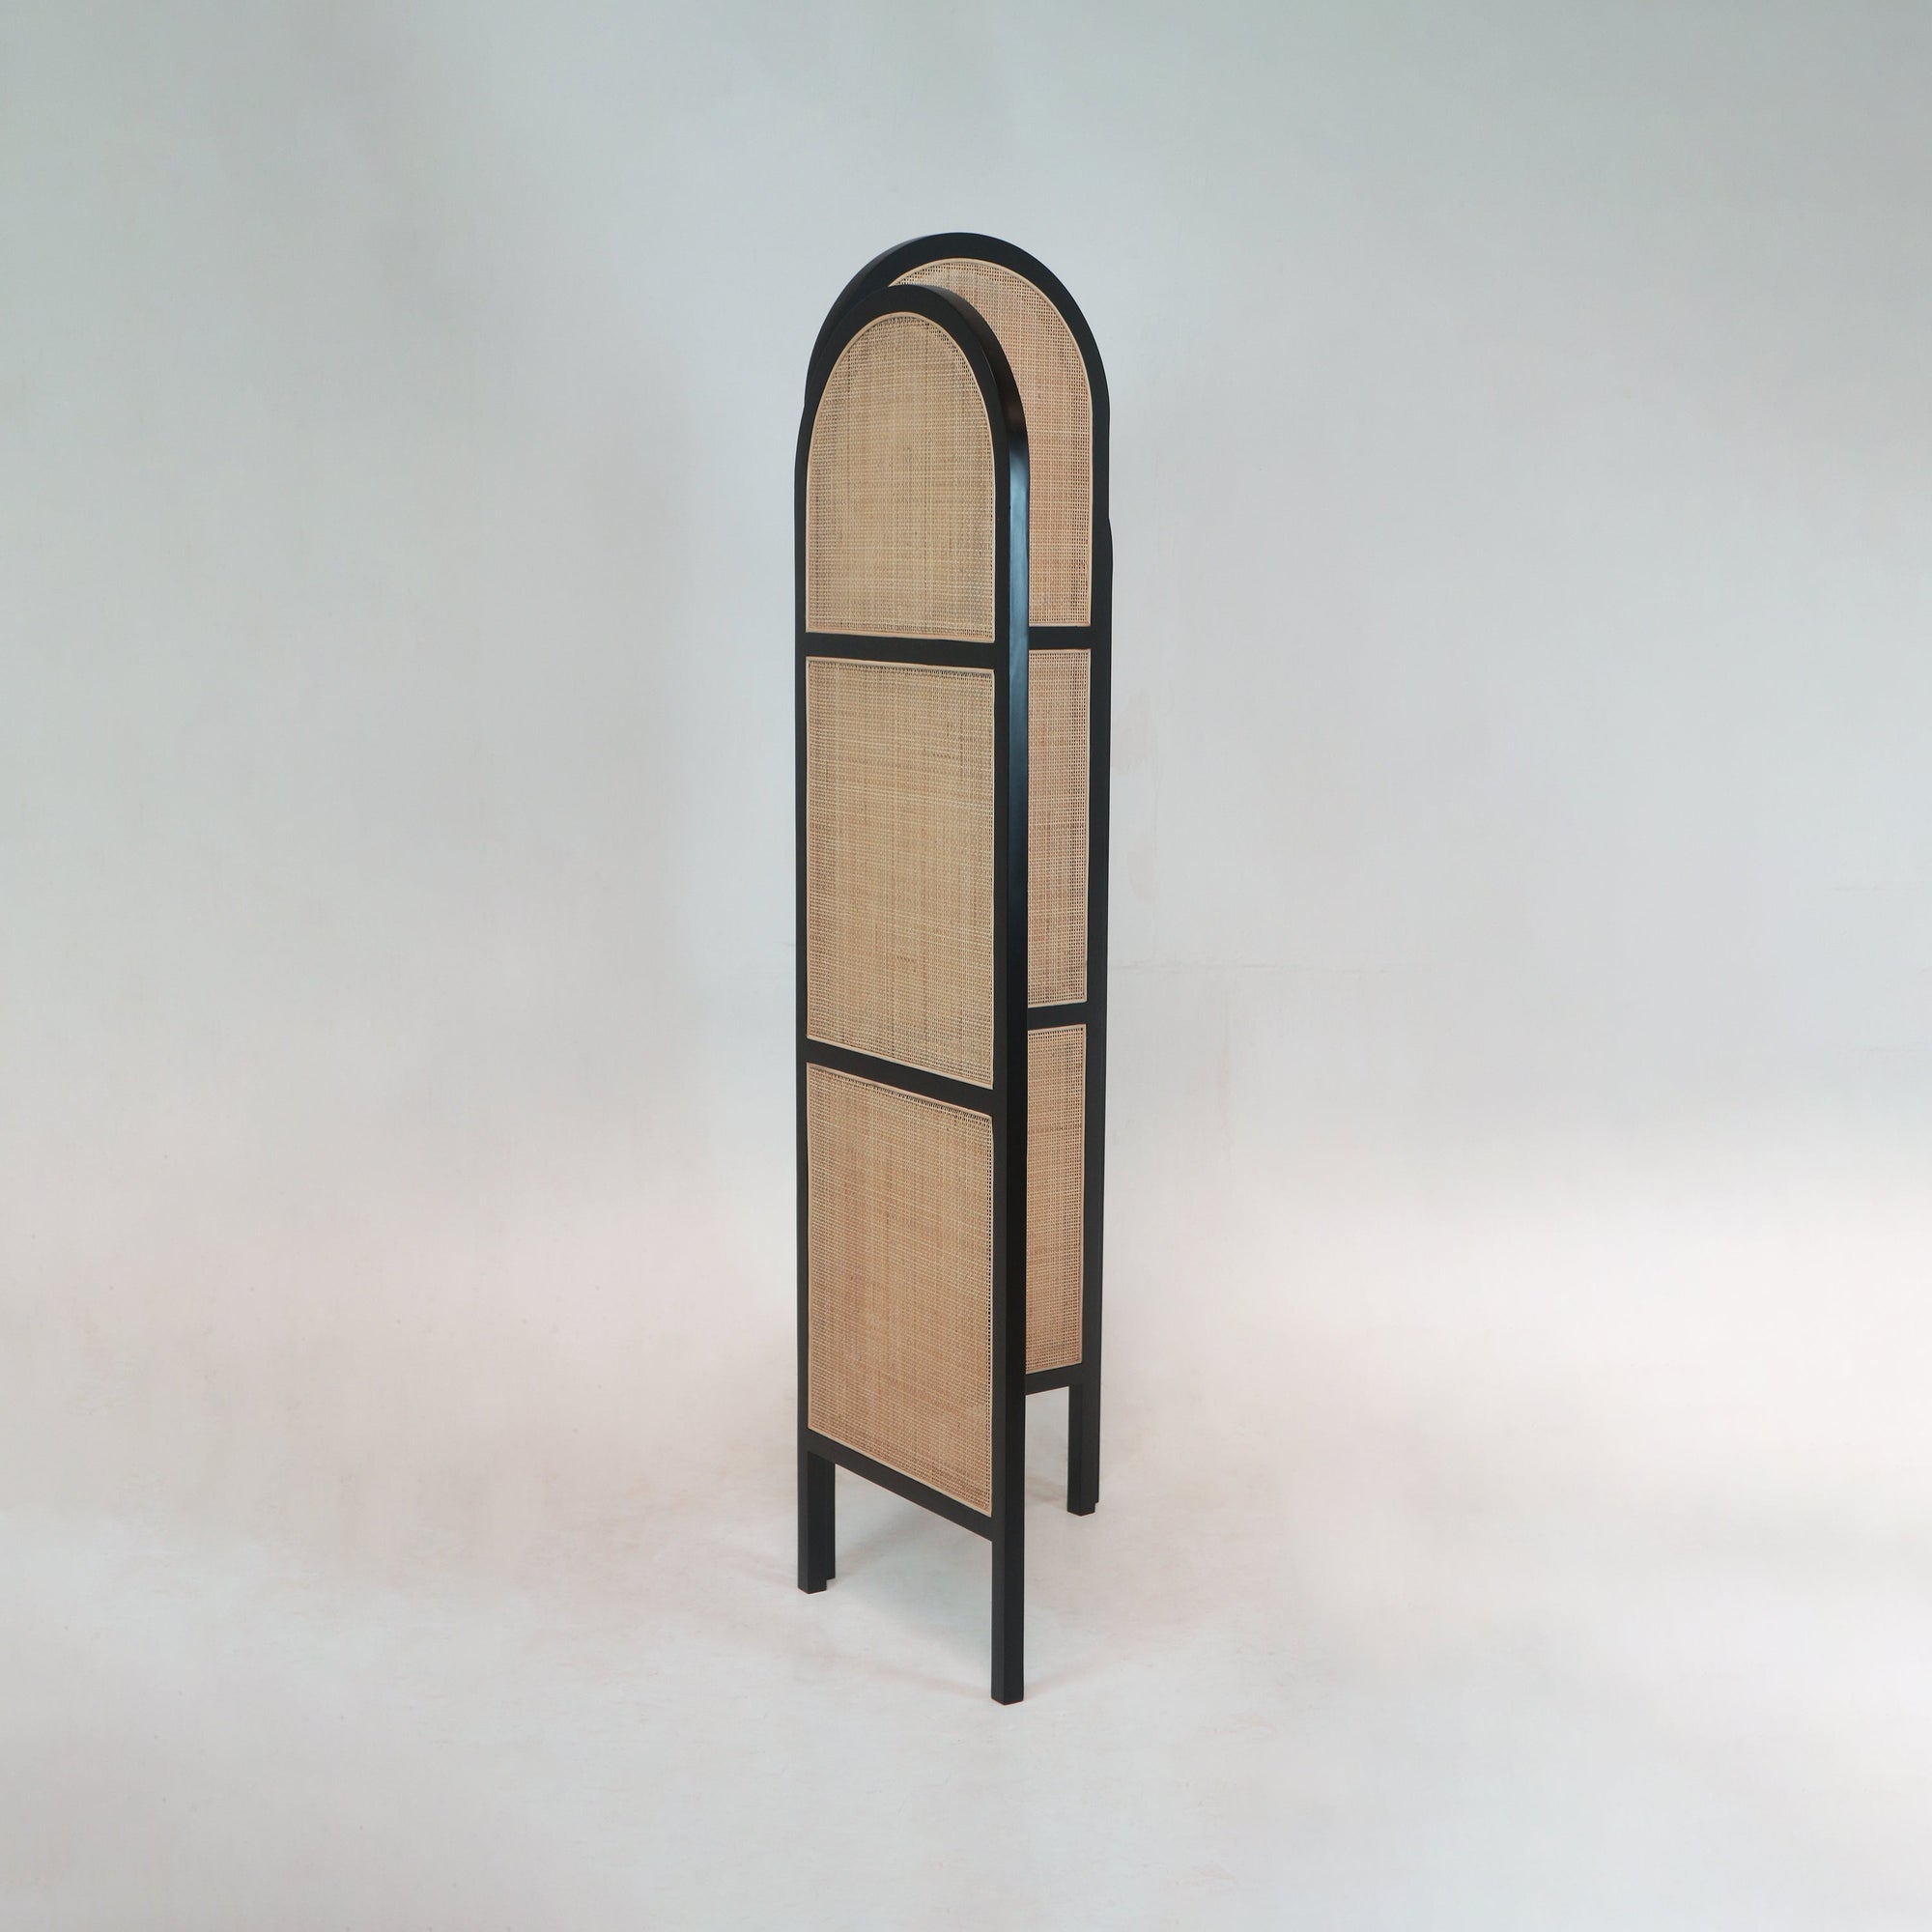 Solid Wood and Rattan Room Divider in Black Gloss - INTERIORTONIC